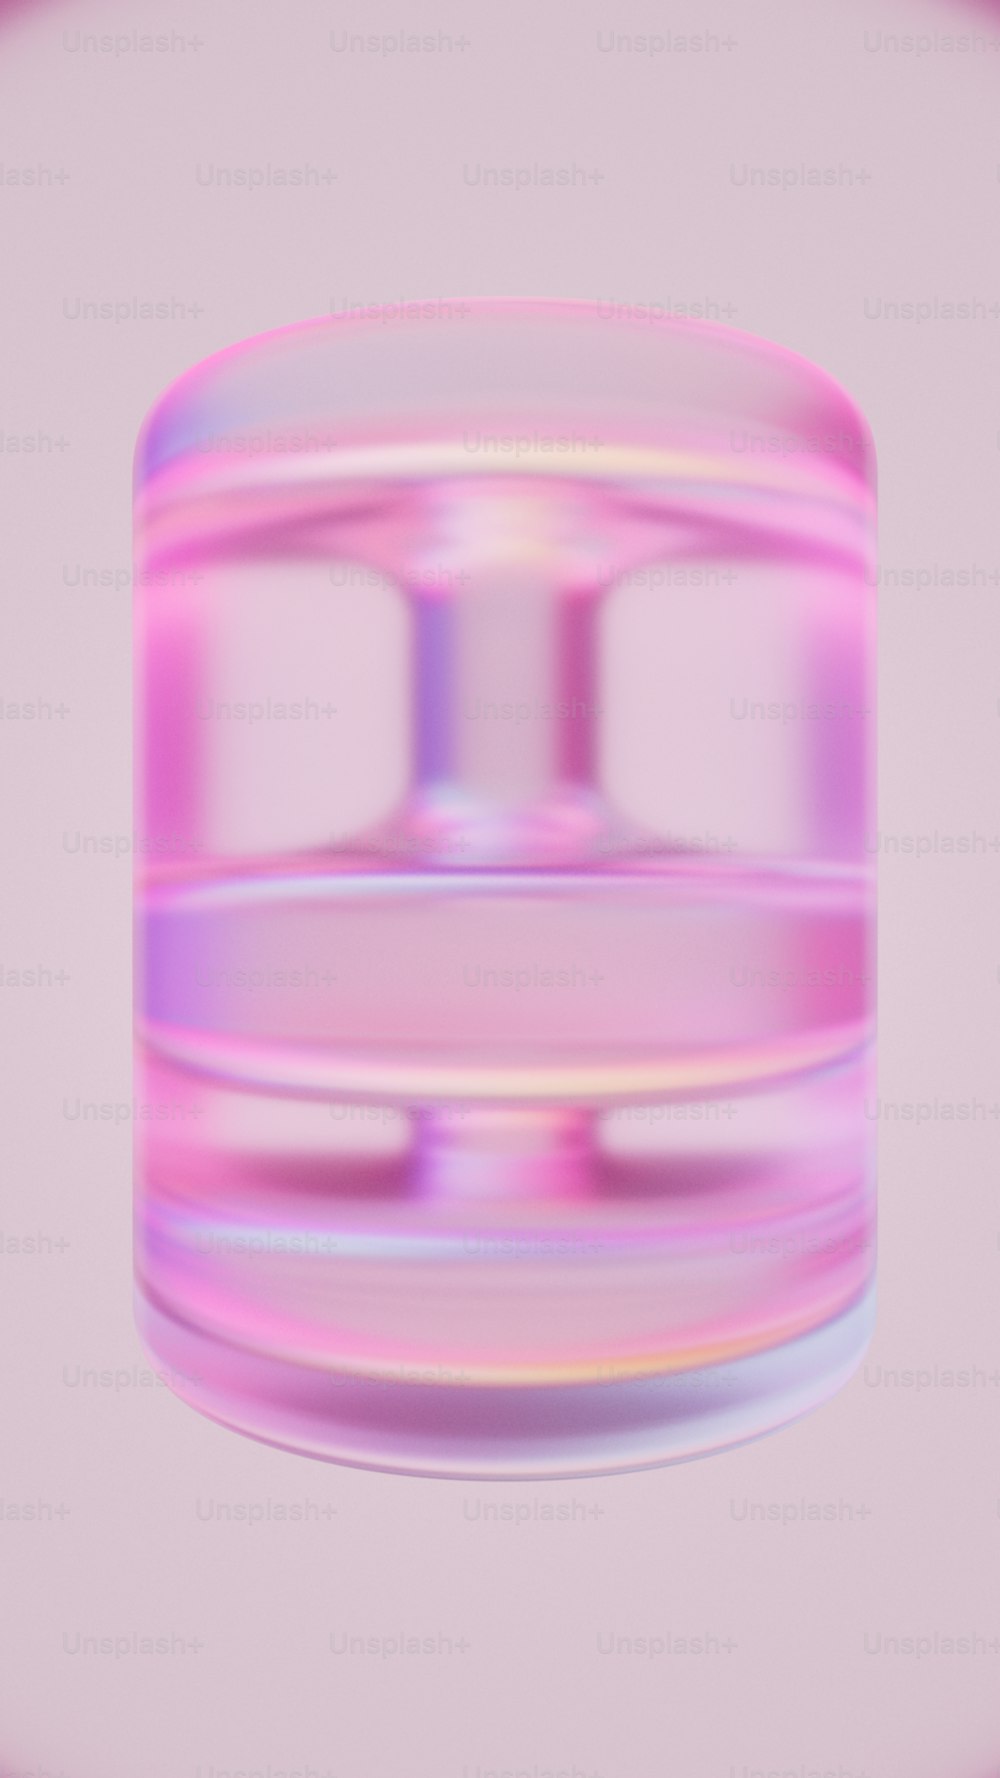 a pink plastic container